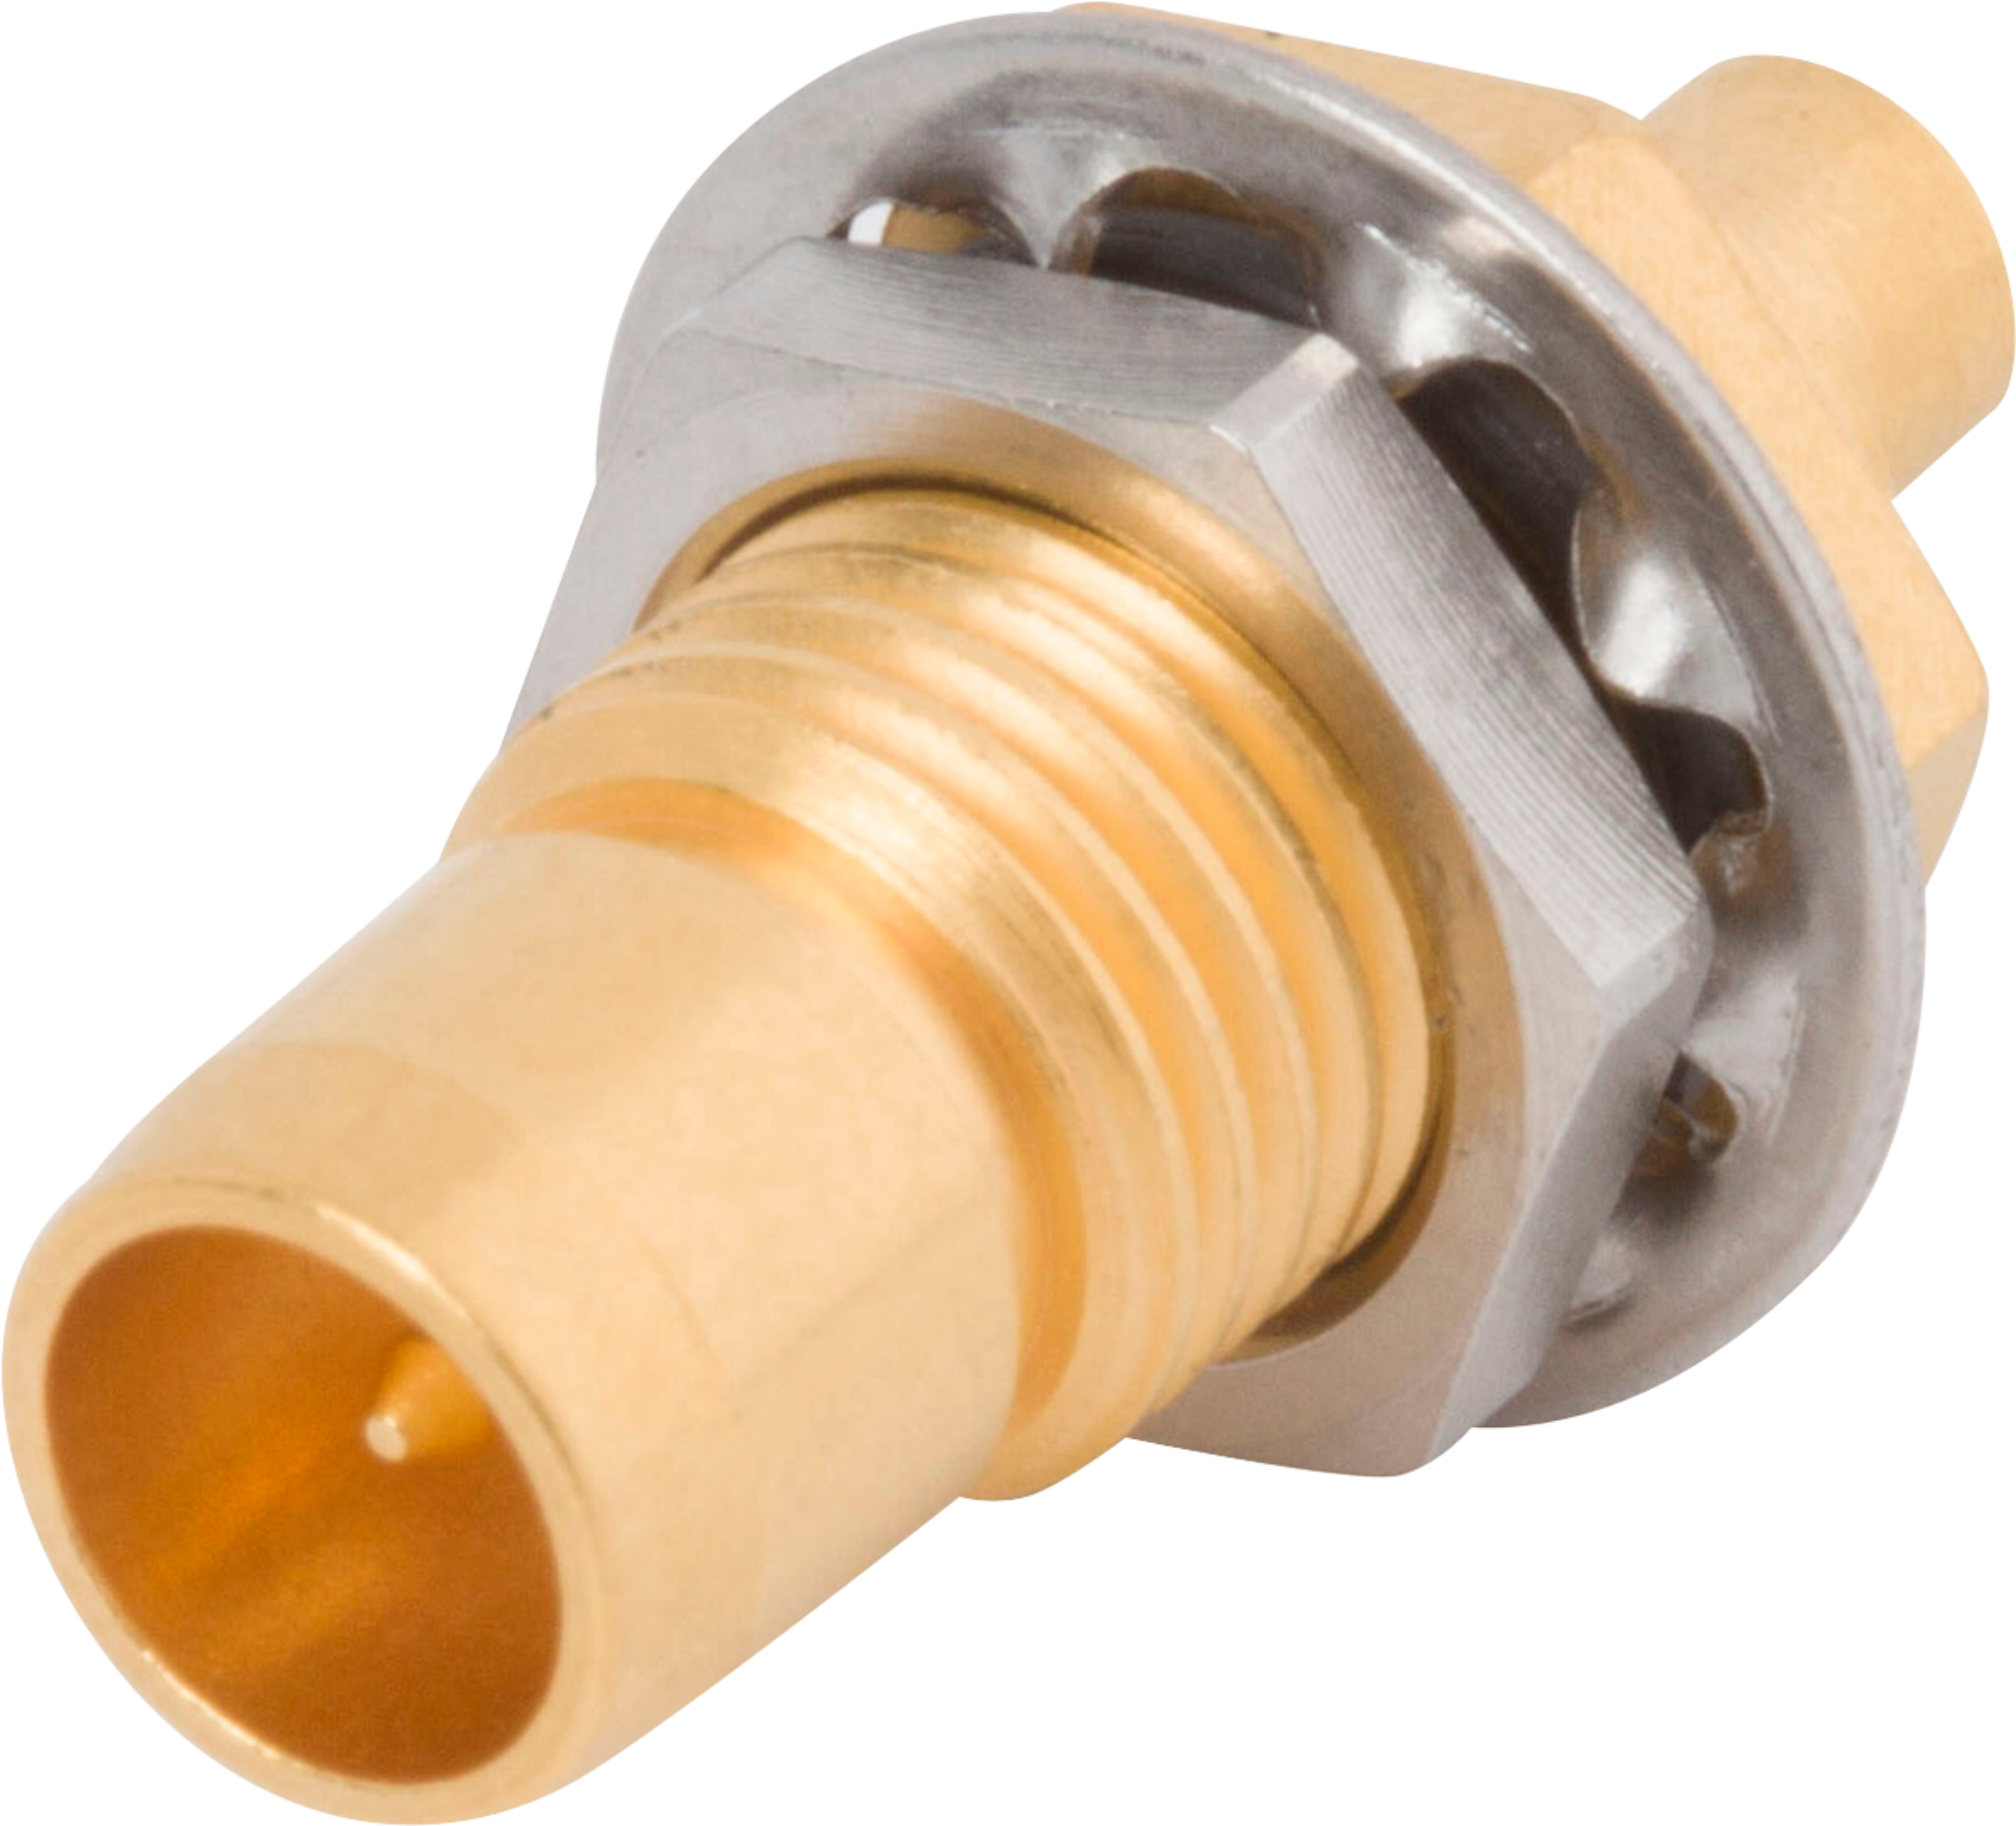 Picture of BMMA Male Connector for .085 Cable